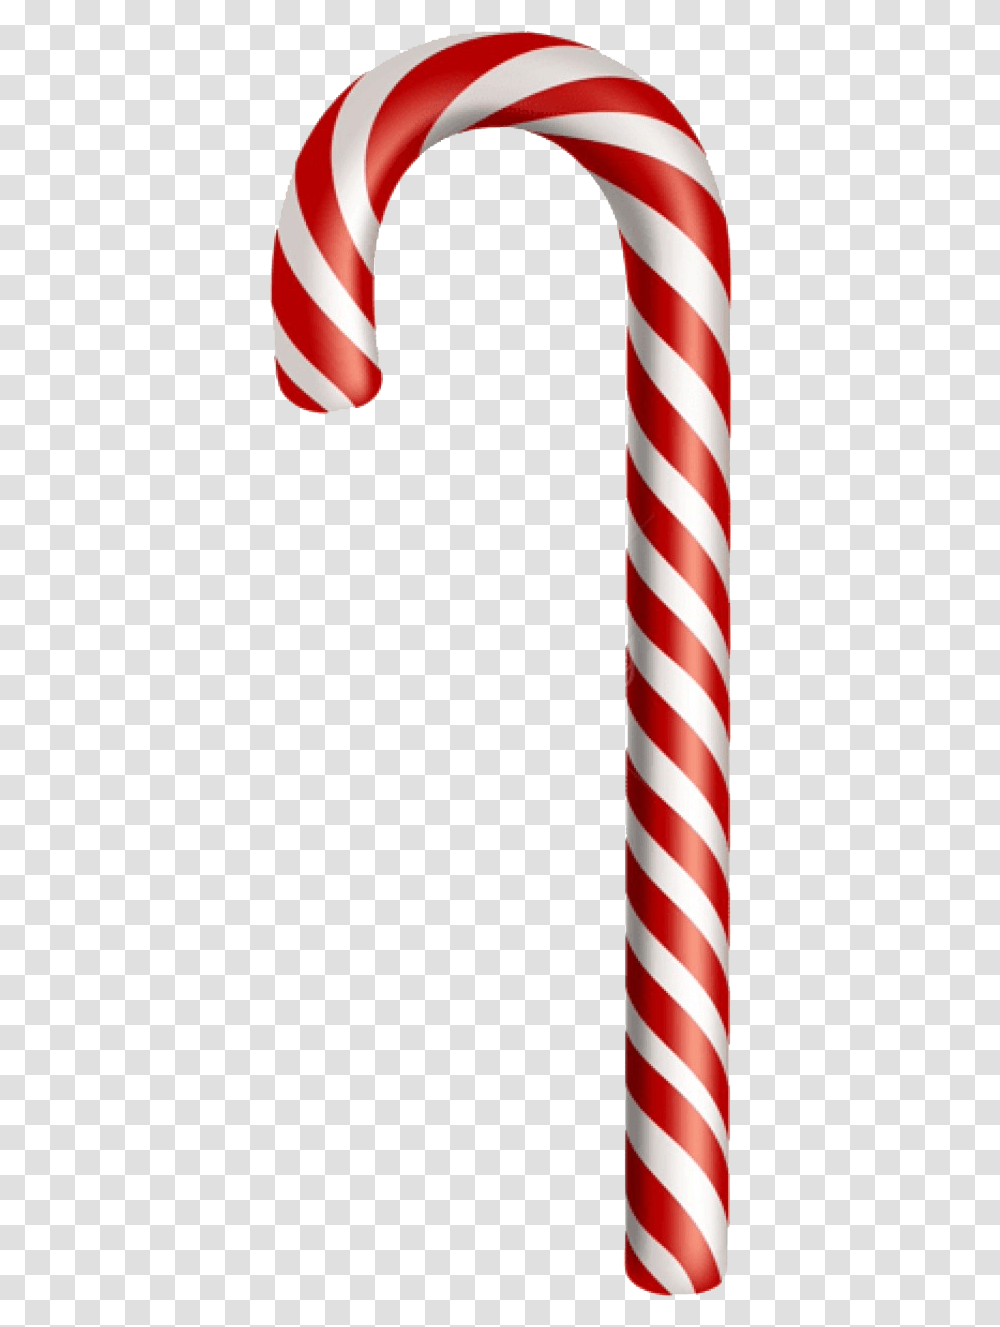 Christmas Candy Cane Image Candy Cane, Sweets, Food, Confectionery Transparent Png